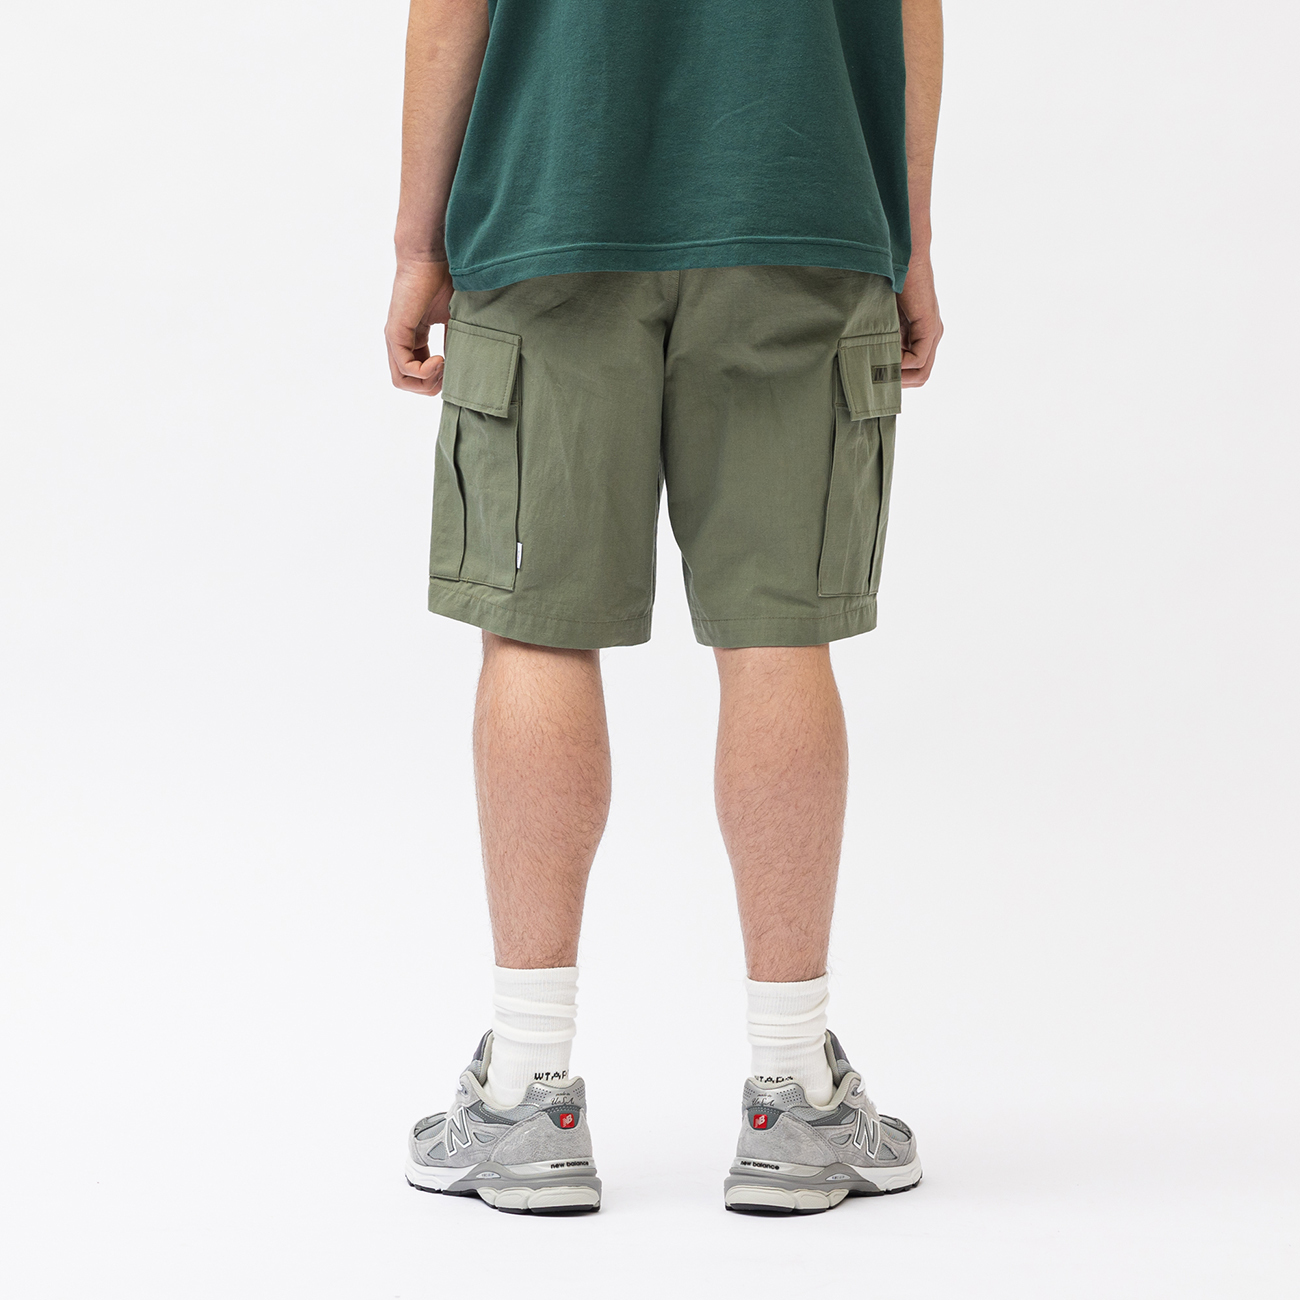 WTAPS 231WVDT-PTM10 MILS9601 / SHORTS / NYCO. RIPSTOP